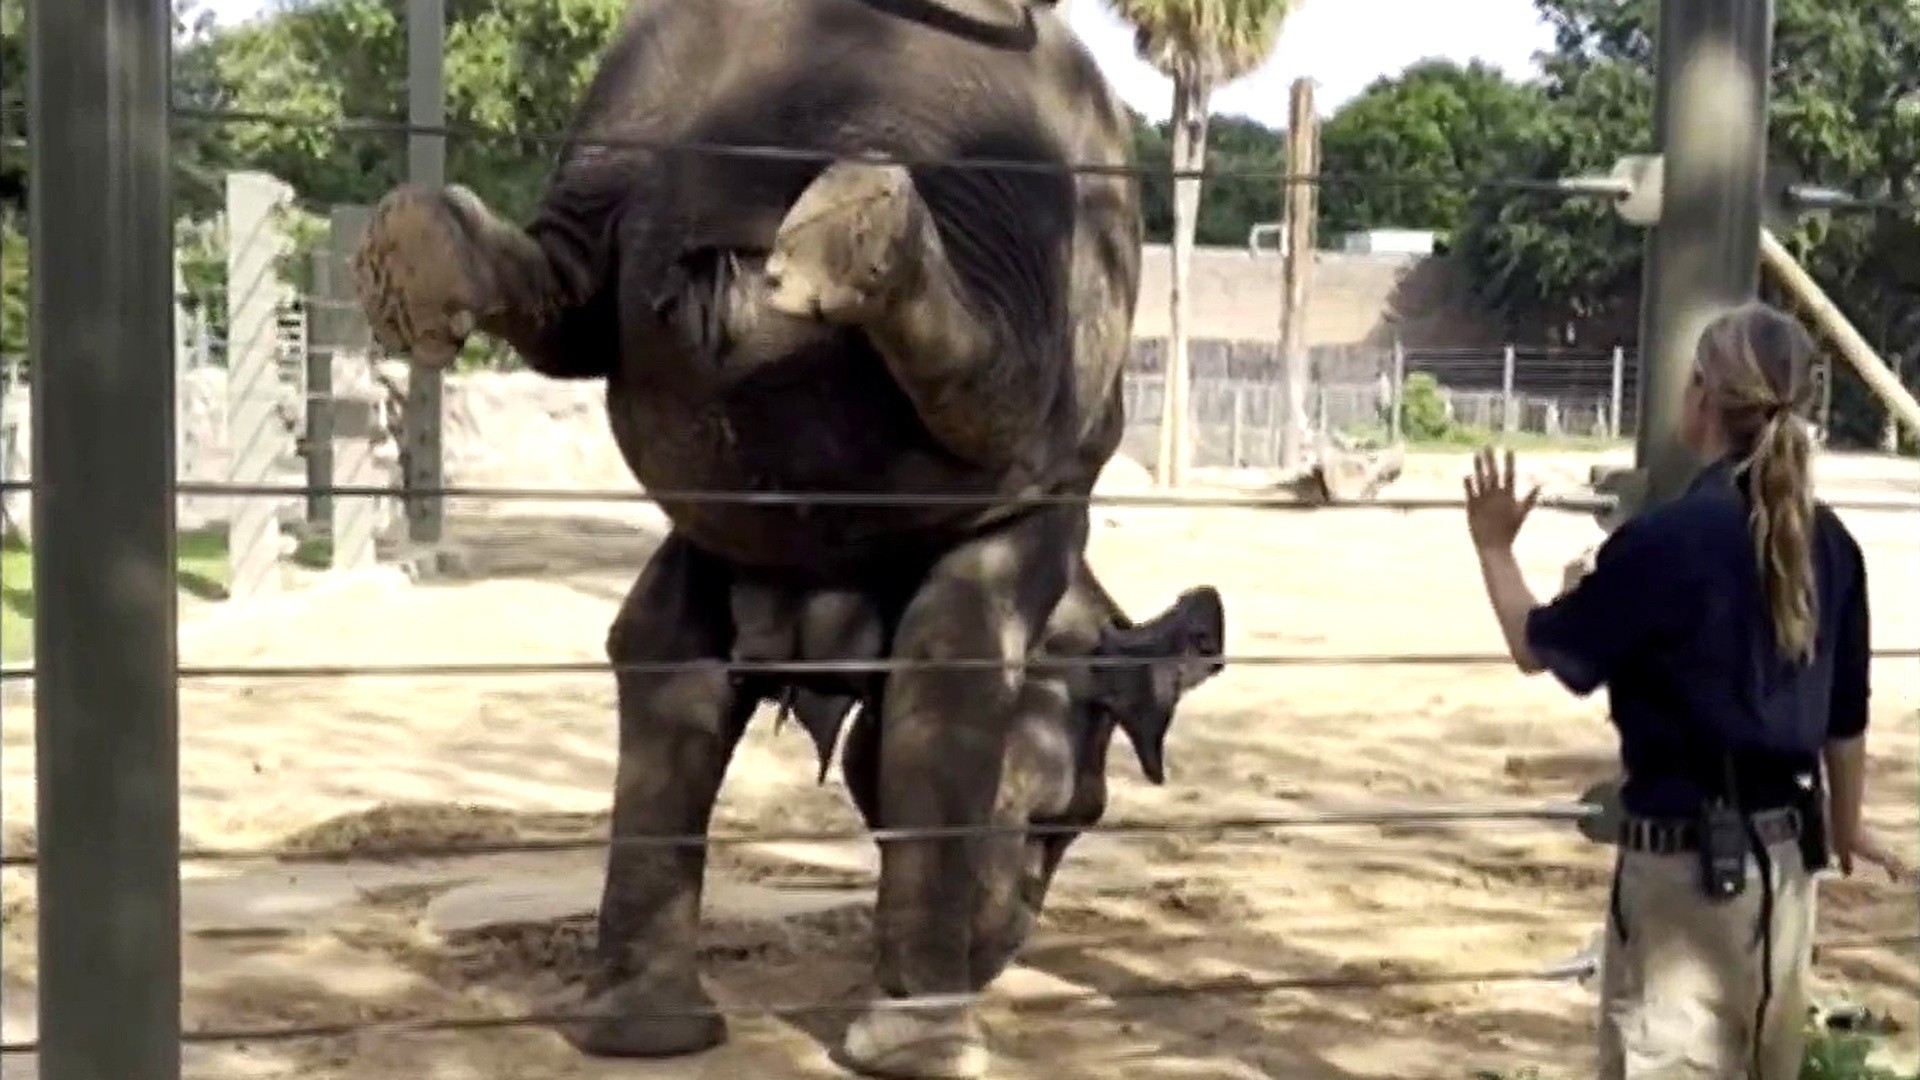 How yoga is helping these elephants at the Houston Zoo